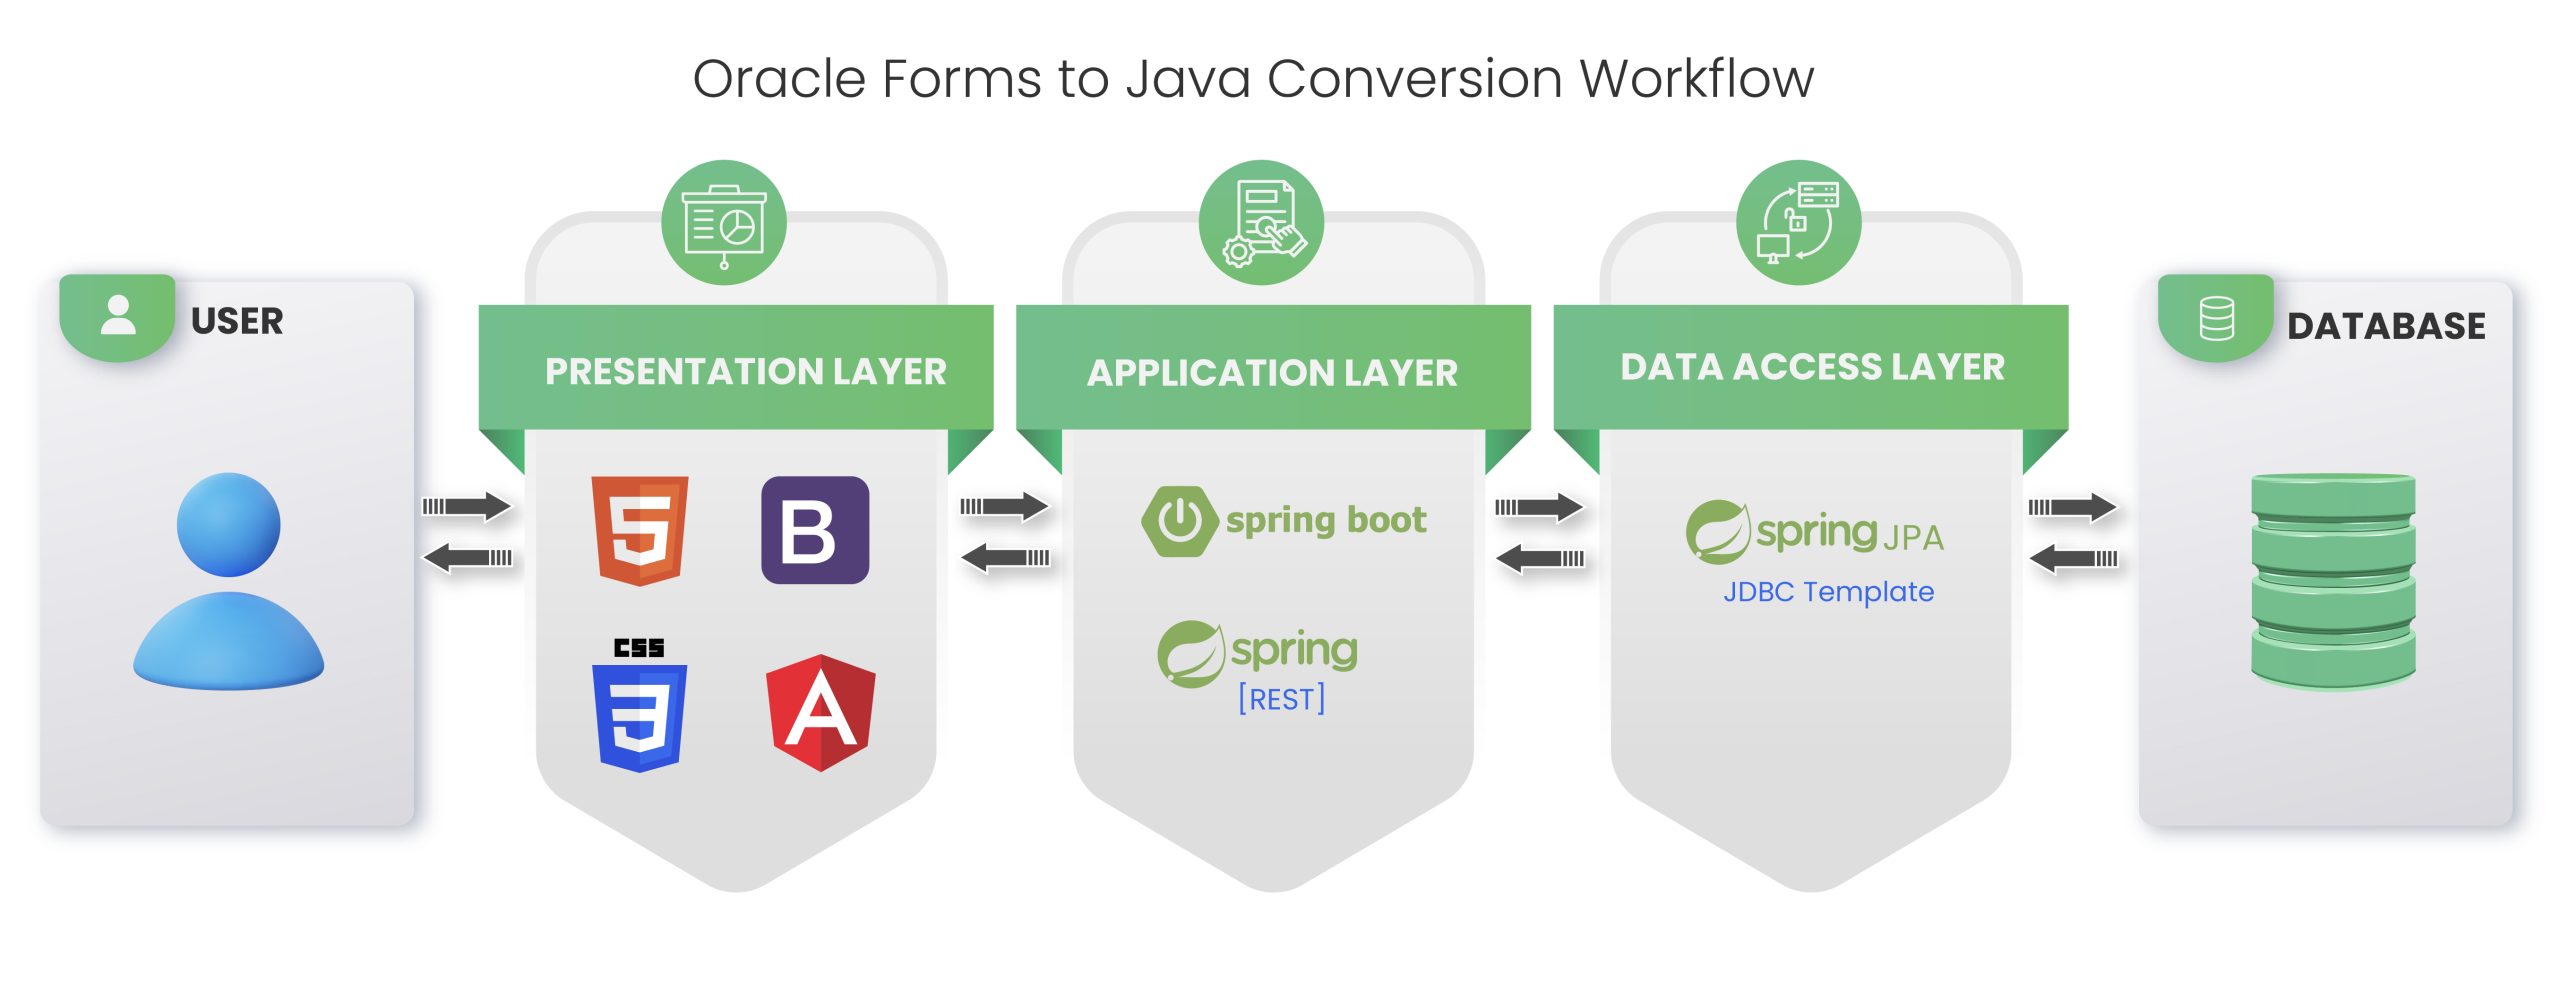 oracle-forms-to-java-modernization-tech-stack